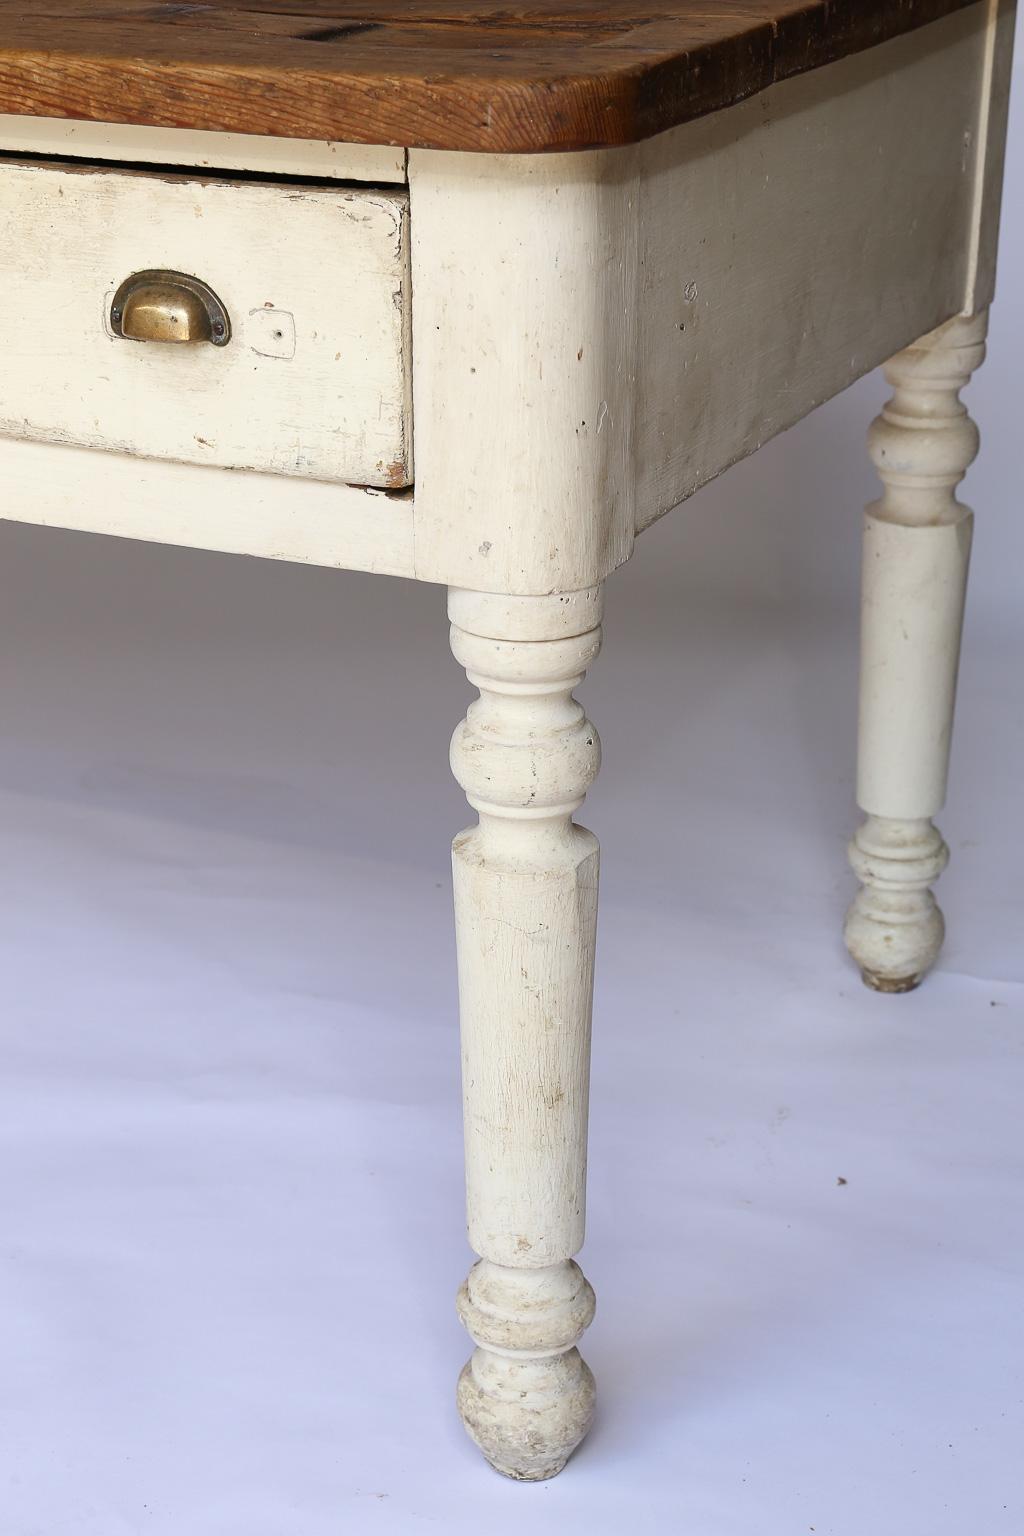 Originally used by an Italian tailor or seamstress this lovely drapers table would be beautiful as a kitchen island, console or entryway piece. The base of the table, painted a creamy white, has turned legs and two drawers with brass pulls, while